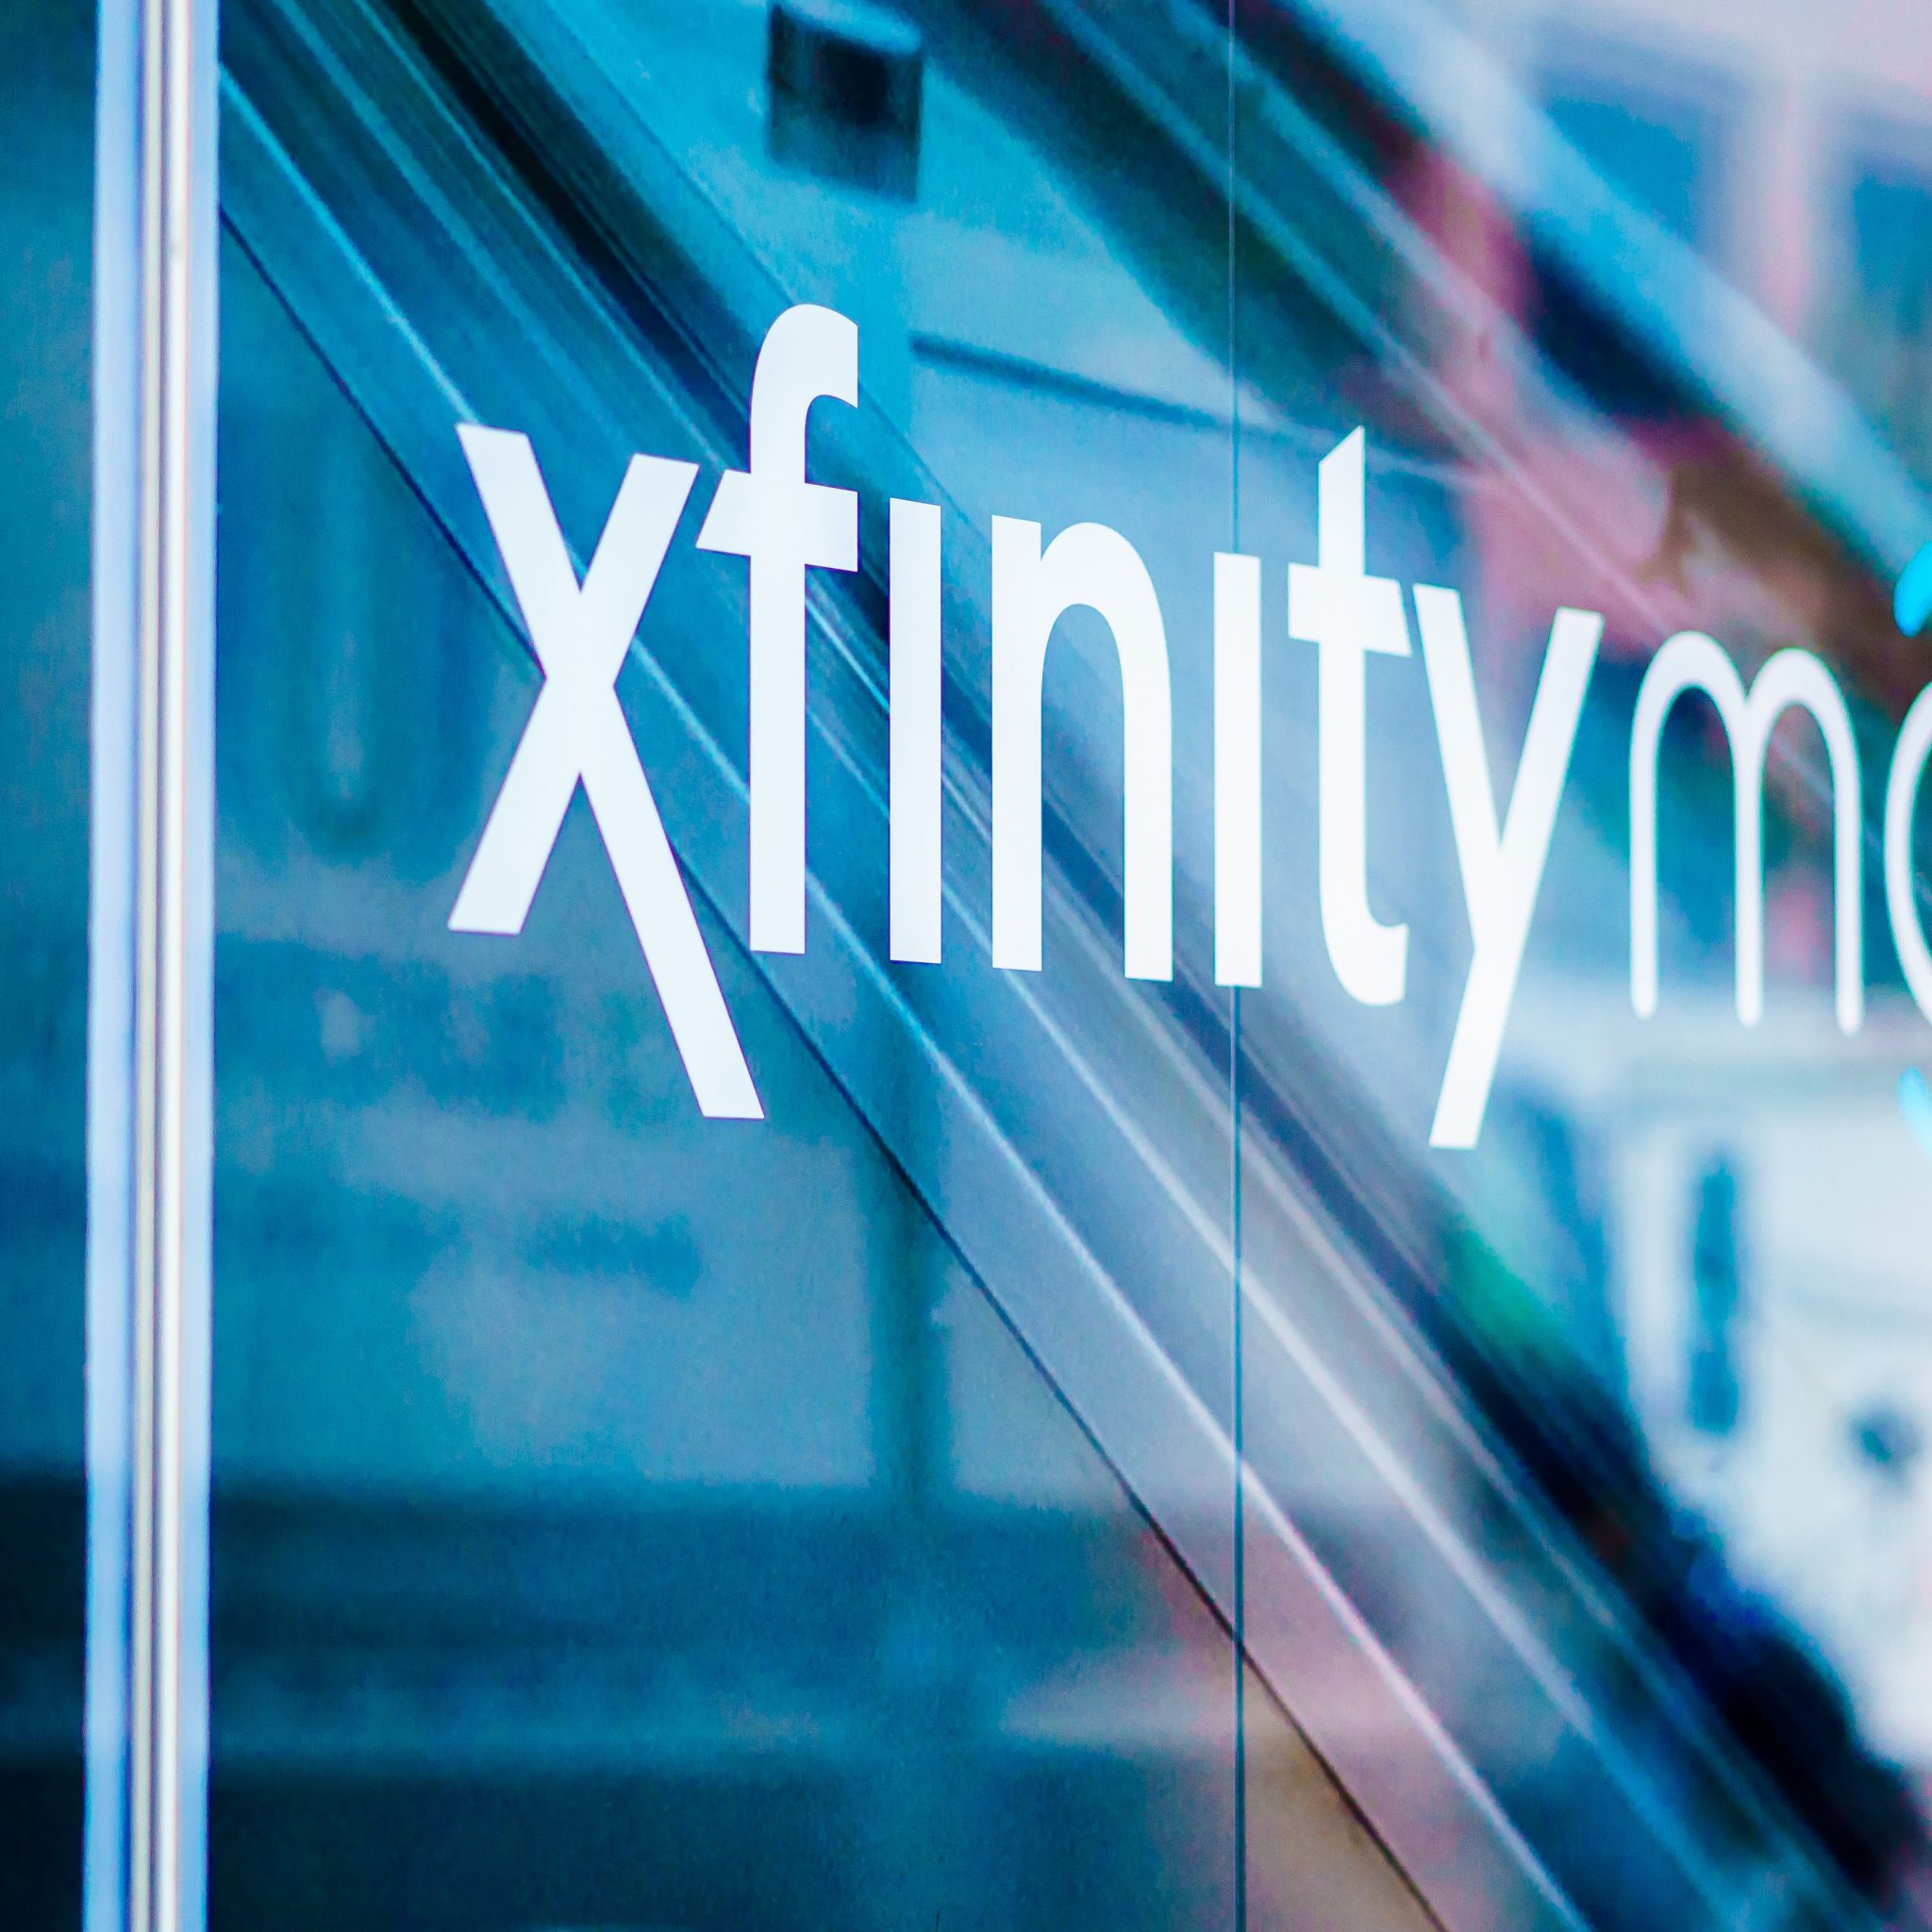 Comcast sees wireless revenues up 40% year-over-year